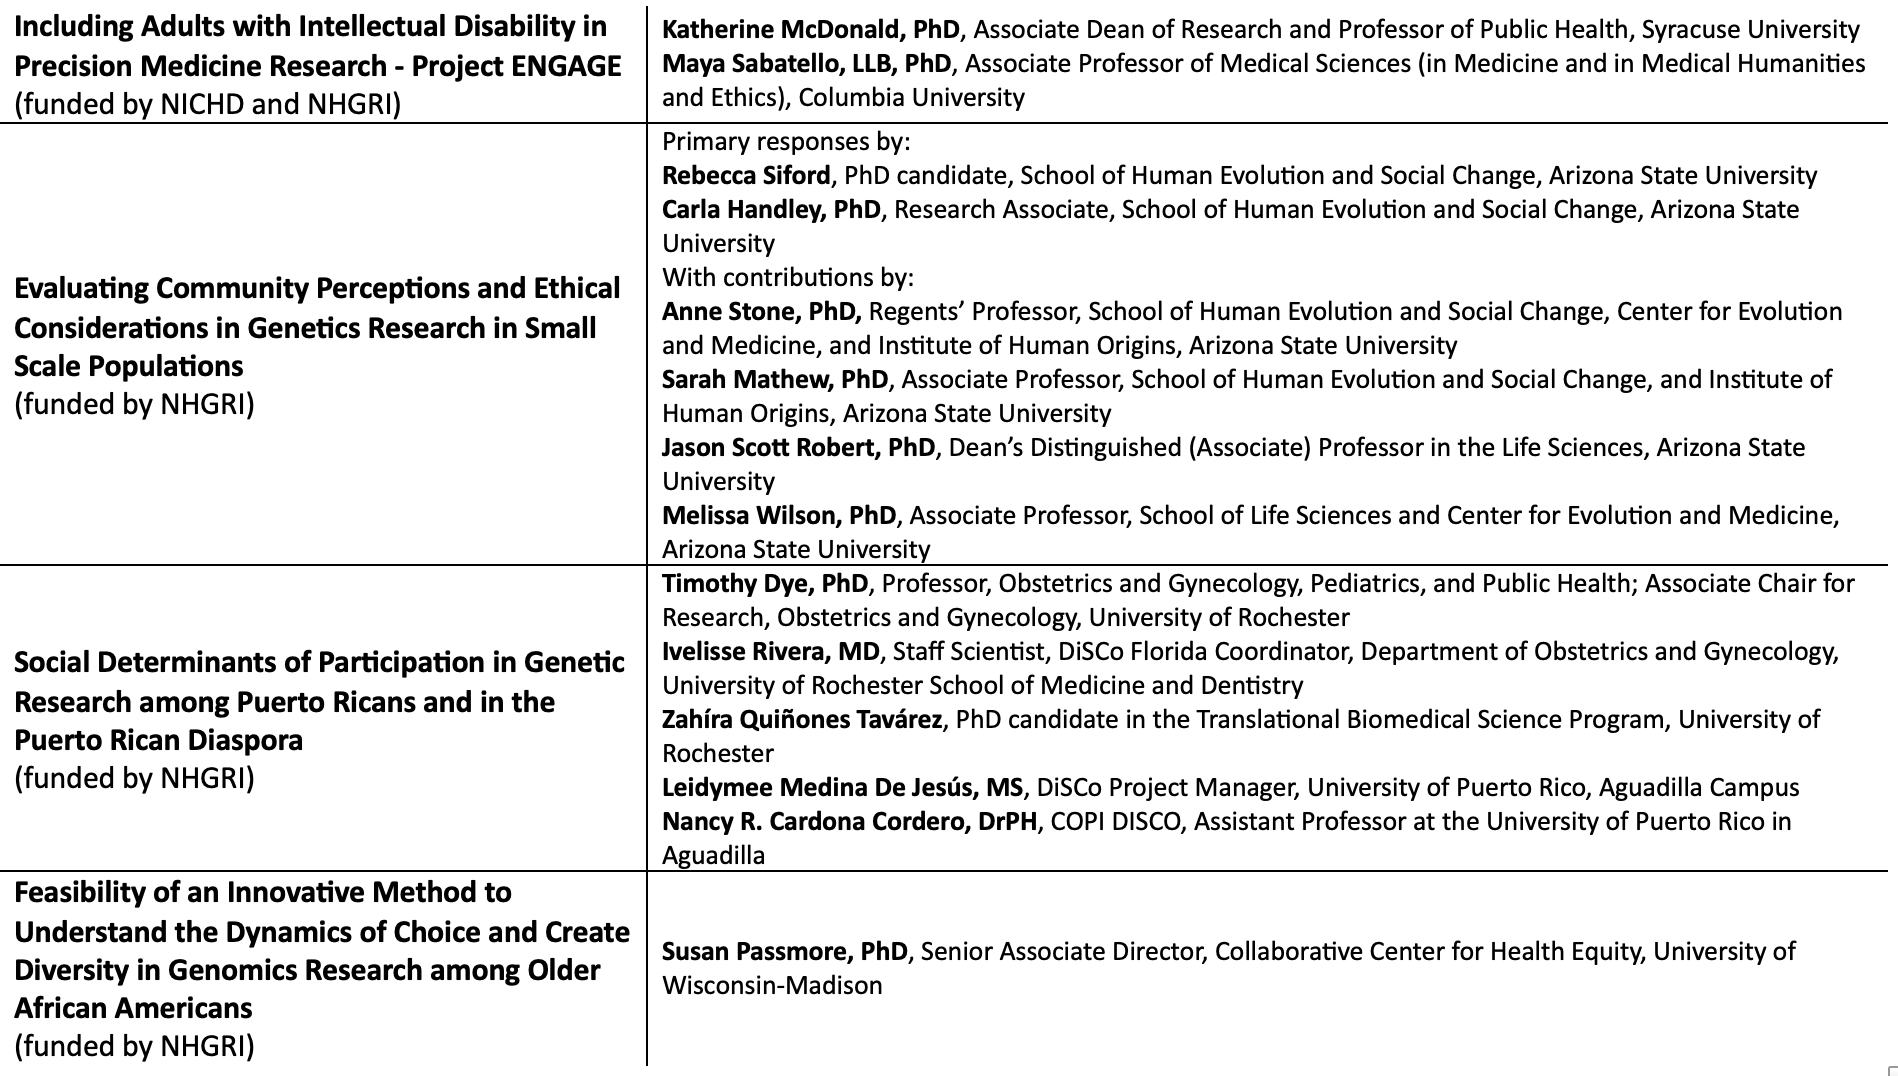 A table summarizing the names and titles of the interviewees and their research projects.